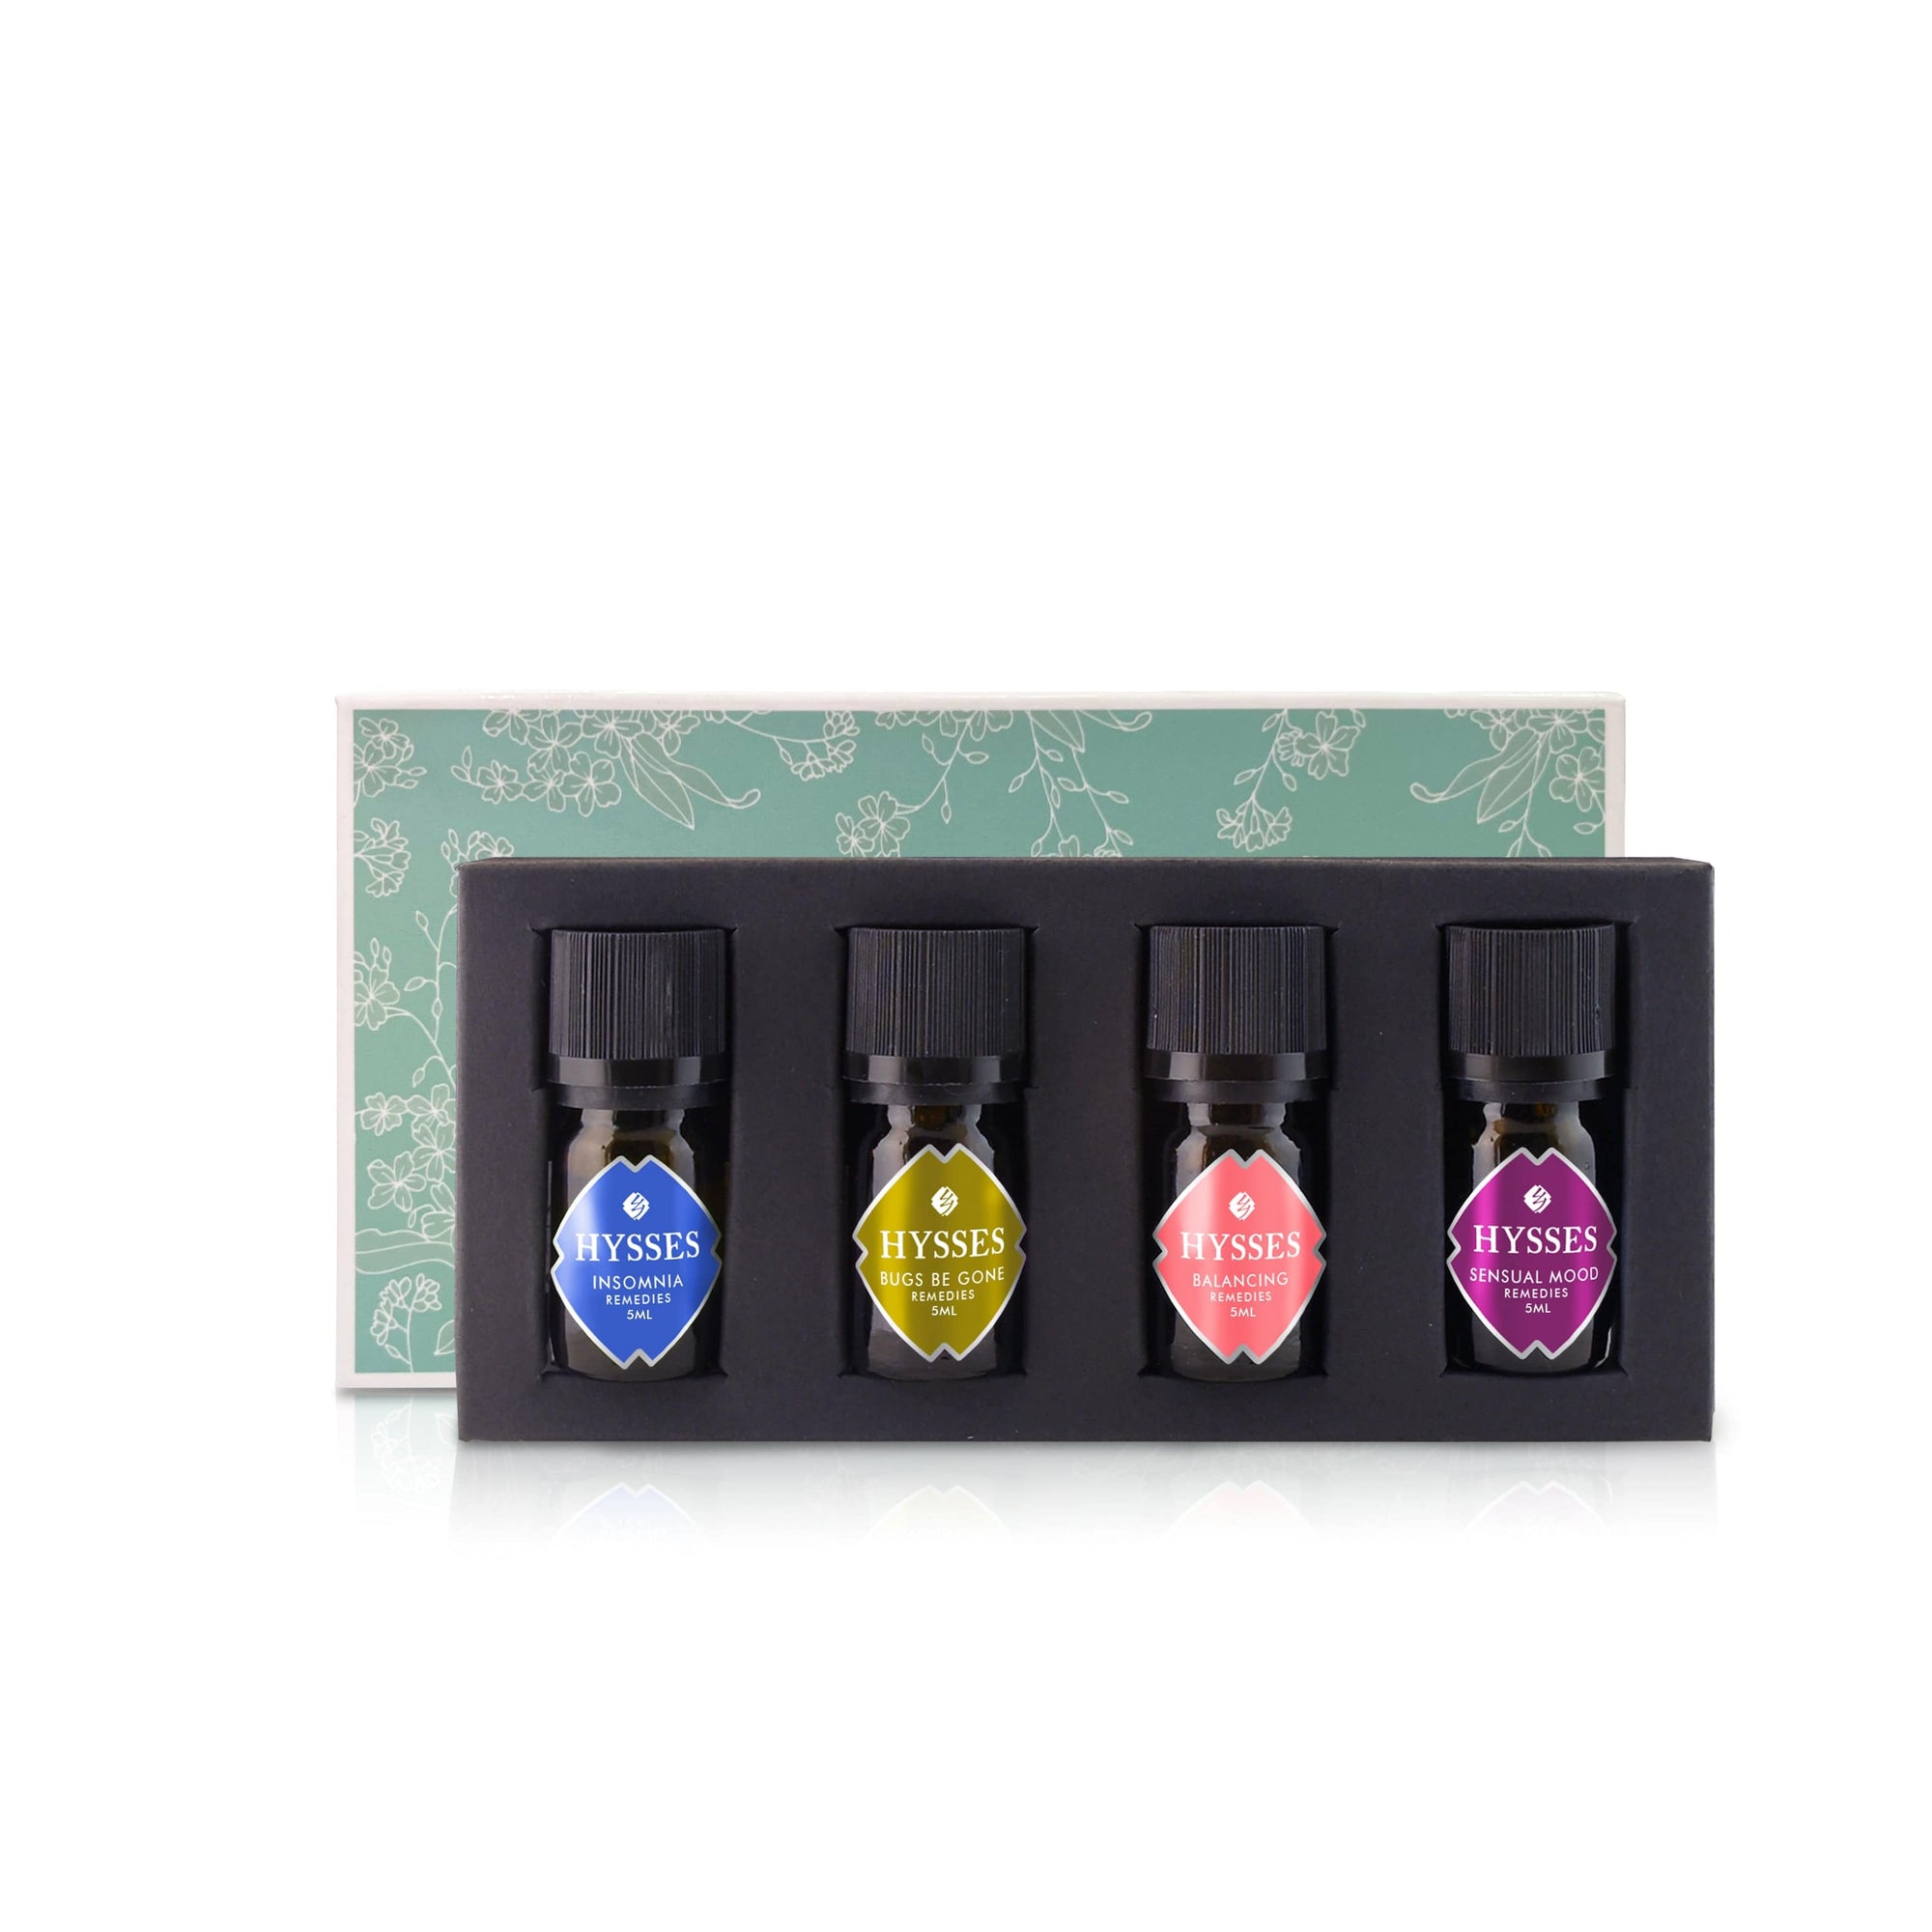 Hysses Essential Oil Essential Oils Set of 4 (Insomnia, Bugs Be Gone, Balancing, Sensual Mood)